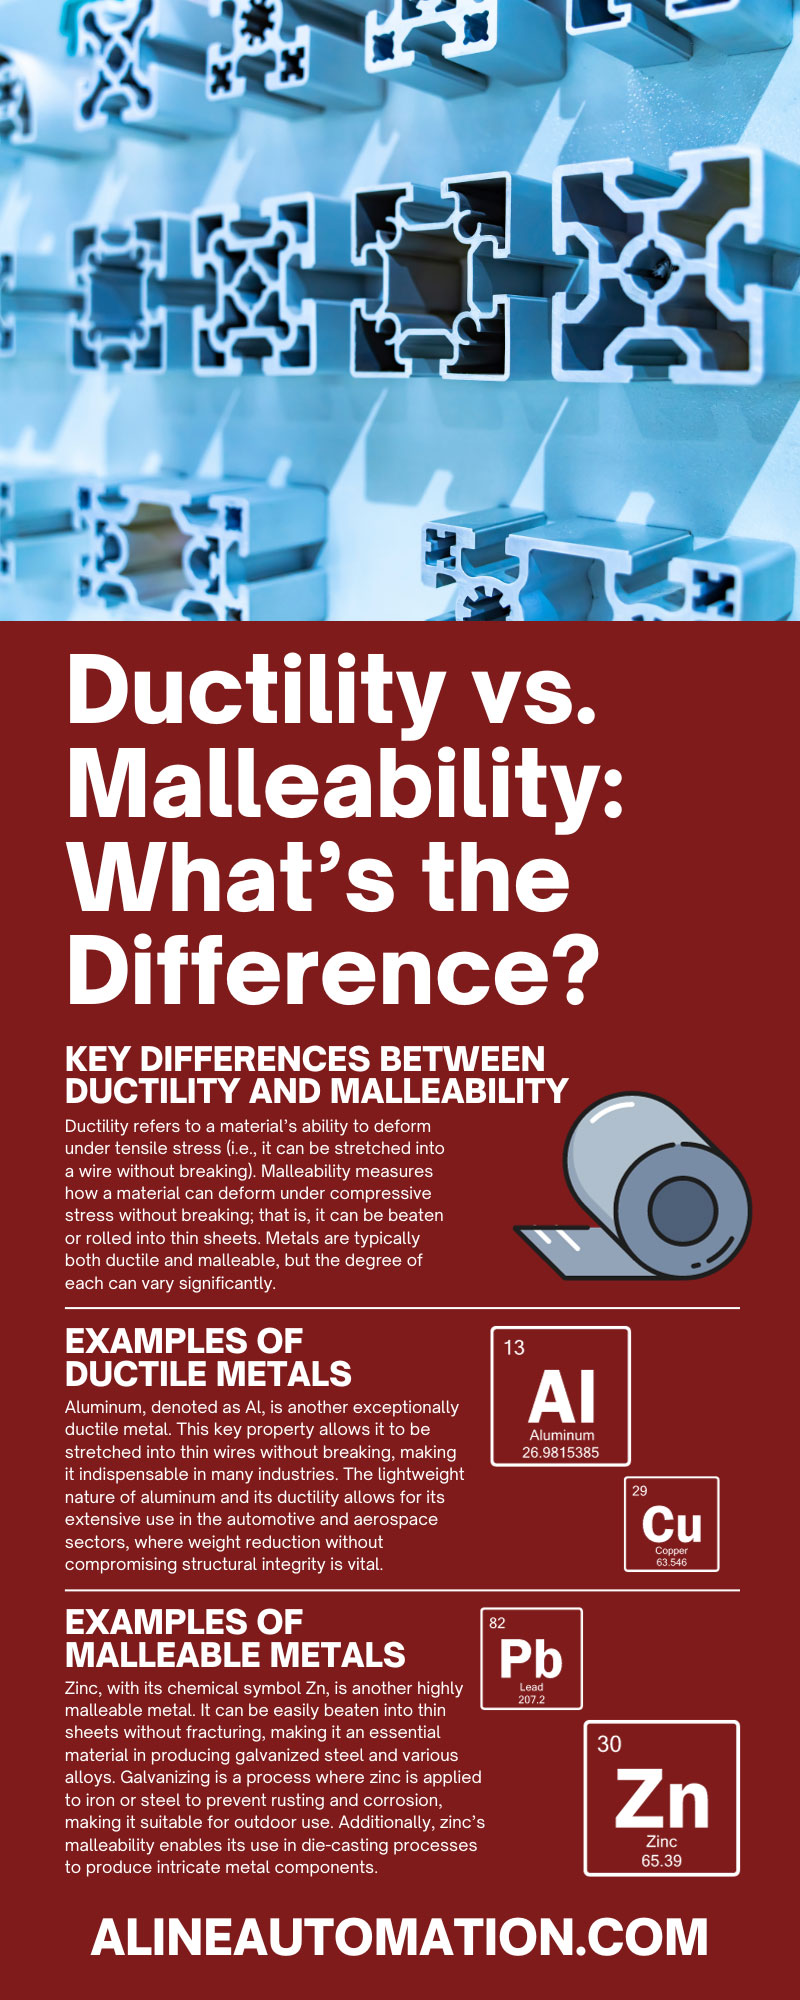 Ductility vs. Malleability: What’s the Difference?